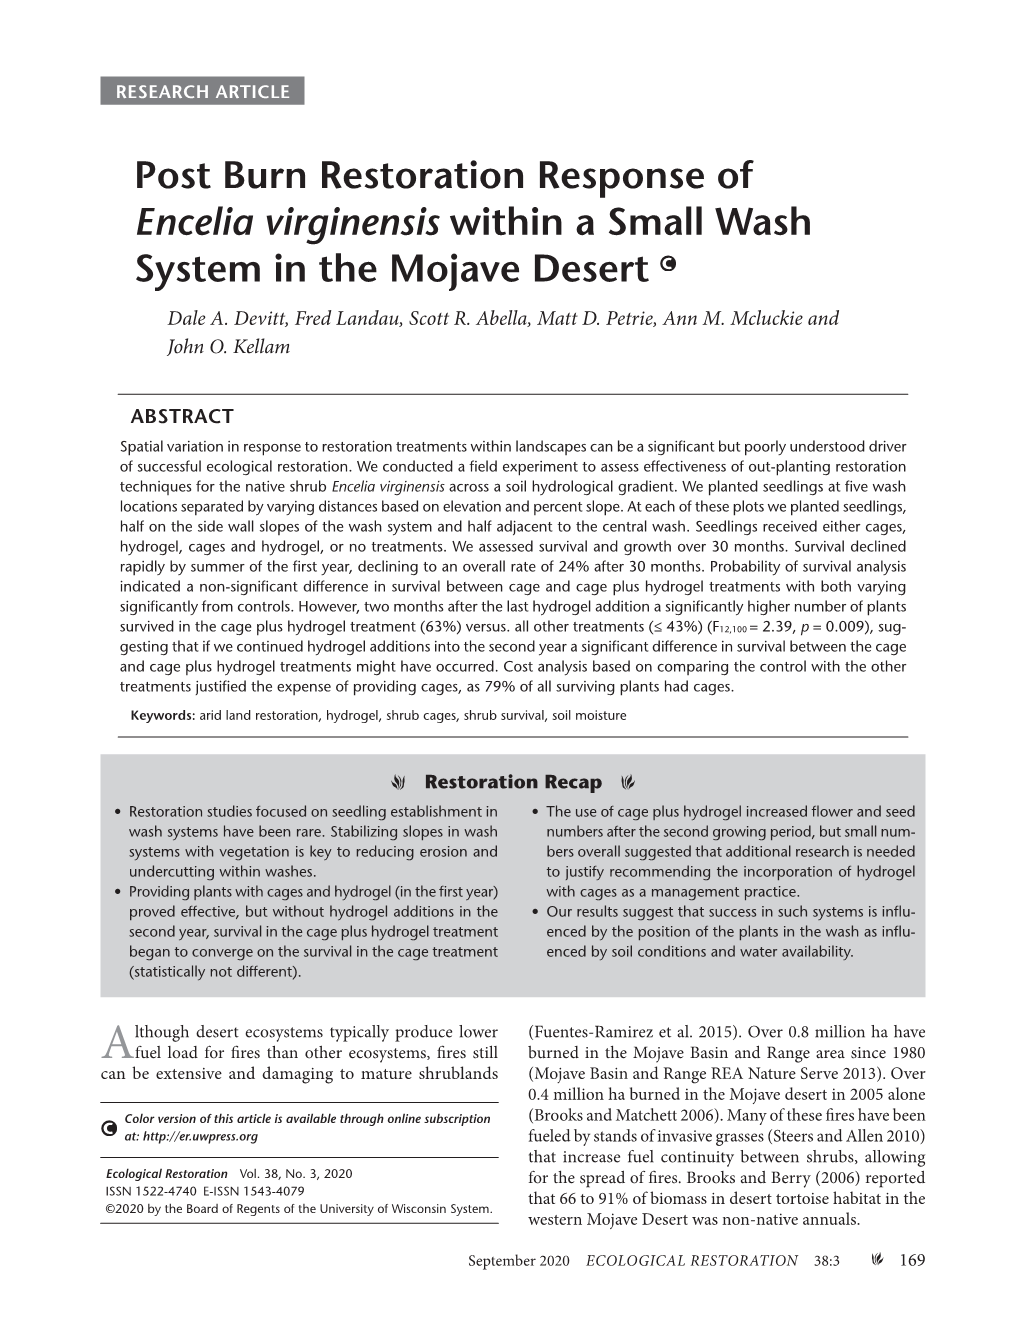 Post Burn Restoration Response of Encelia Virginensis Within a Small Wash System in the Mojave Desert Dale A